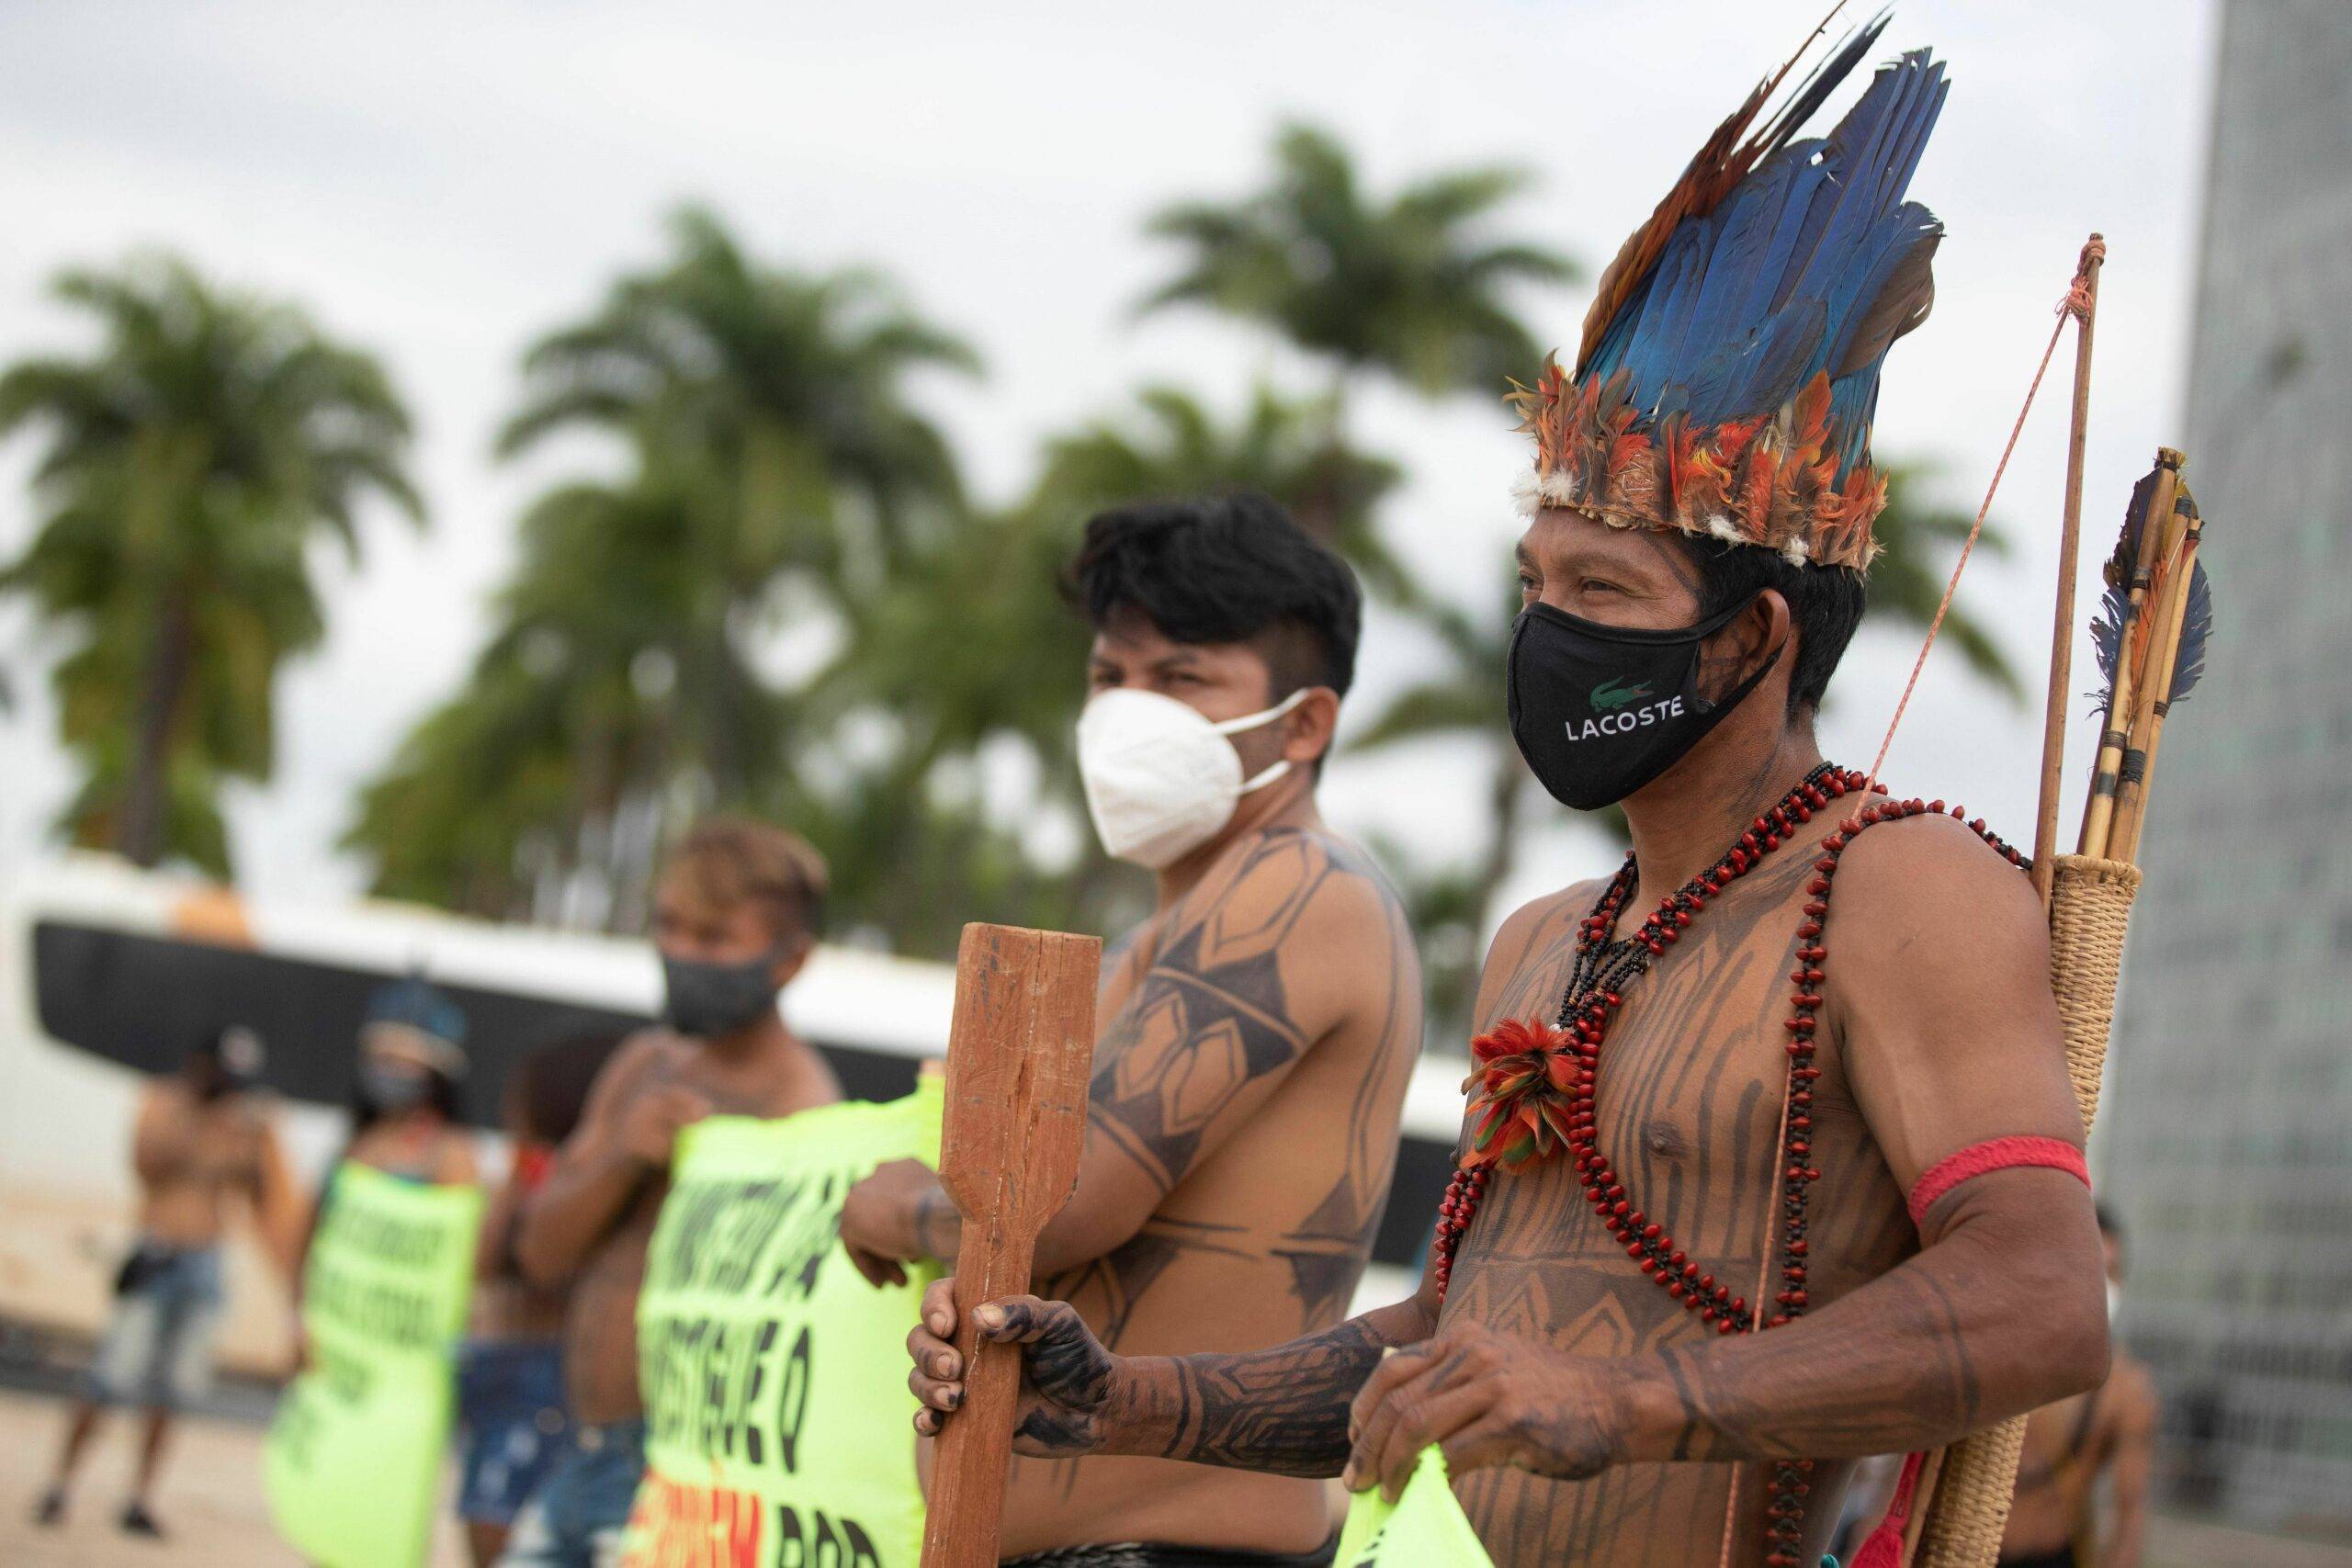 Indigenous people of the Munduruku ethnic group protest calling for the demarcation of their lands against illegal mining and the resignation of Brazilian President Jair Bolsonaro, in Brasilia, Brazil, 19 April 2021. Native peoples demanded protection of their rights this Monday, on the commemoration of the Indian Day in Brazil, which purpose is precisely to make visible the resistance of the ancestral communities in the Amazon and other threatened territories. EFE/Joedson Alves//EFE_20210419-637544531321422081/2104191836/Credit:Joédson Alves/EFE/SIPA/2104191838